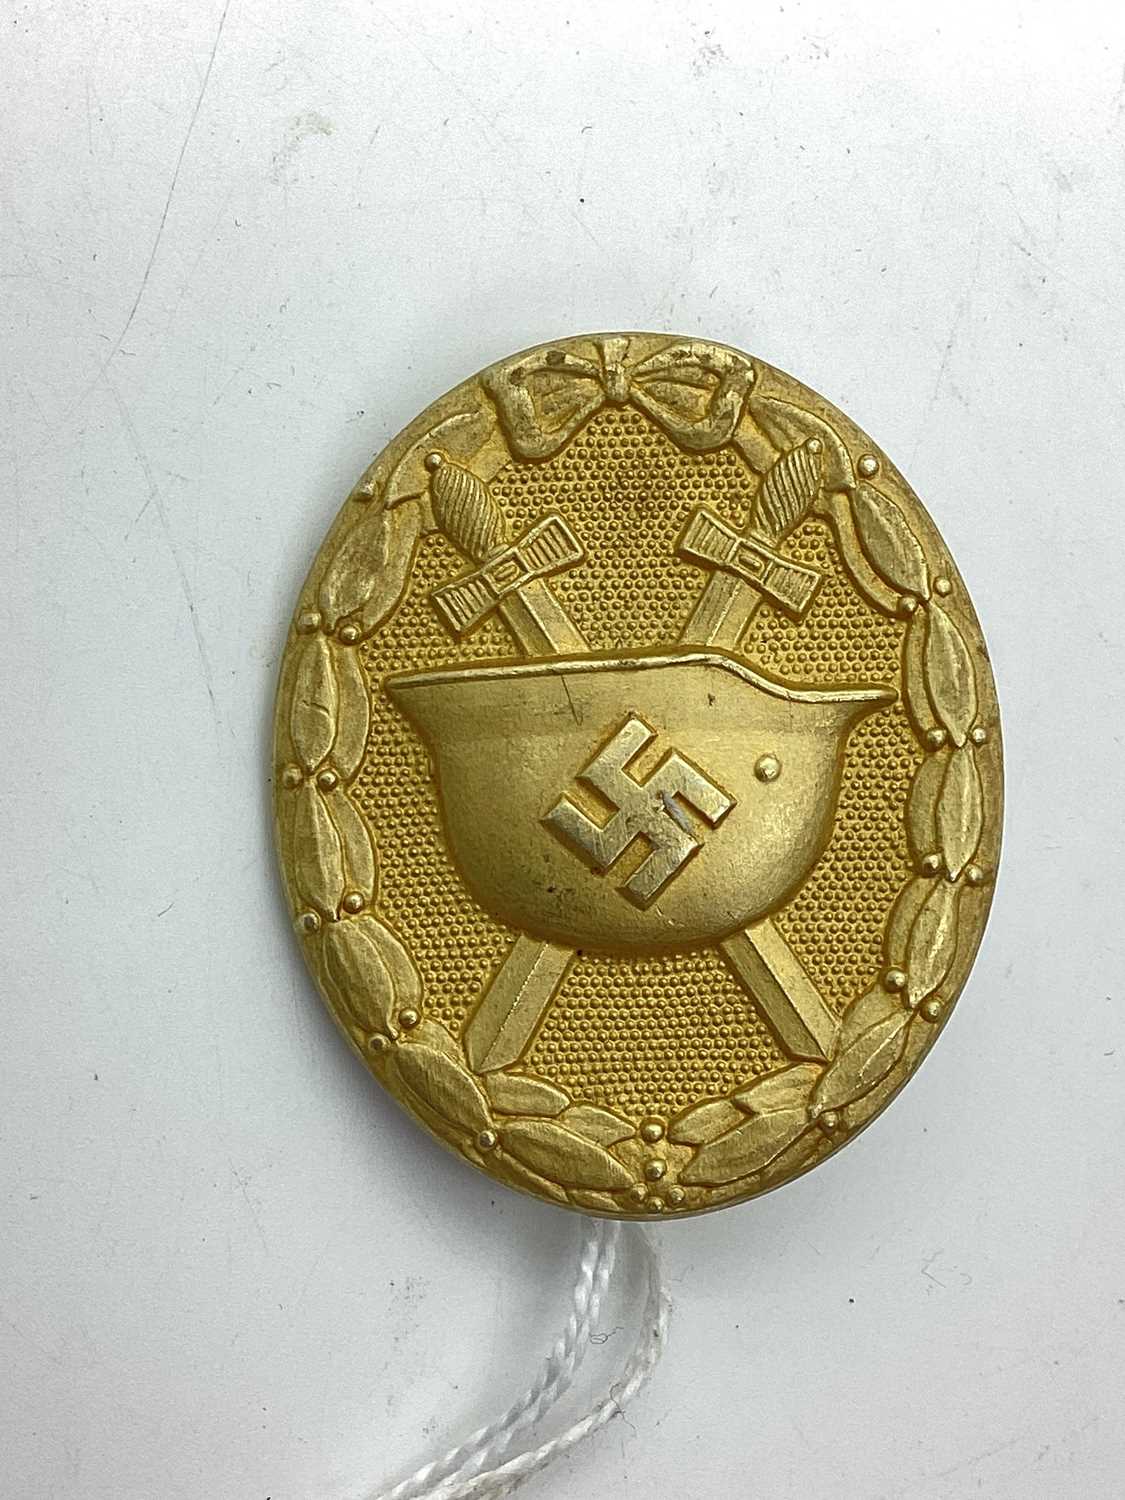 WWII Third Reich German Wound Badge Gold Grade, with manufacturer mark L/53 on reverse. Due to the